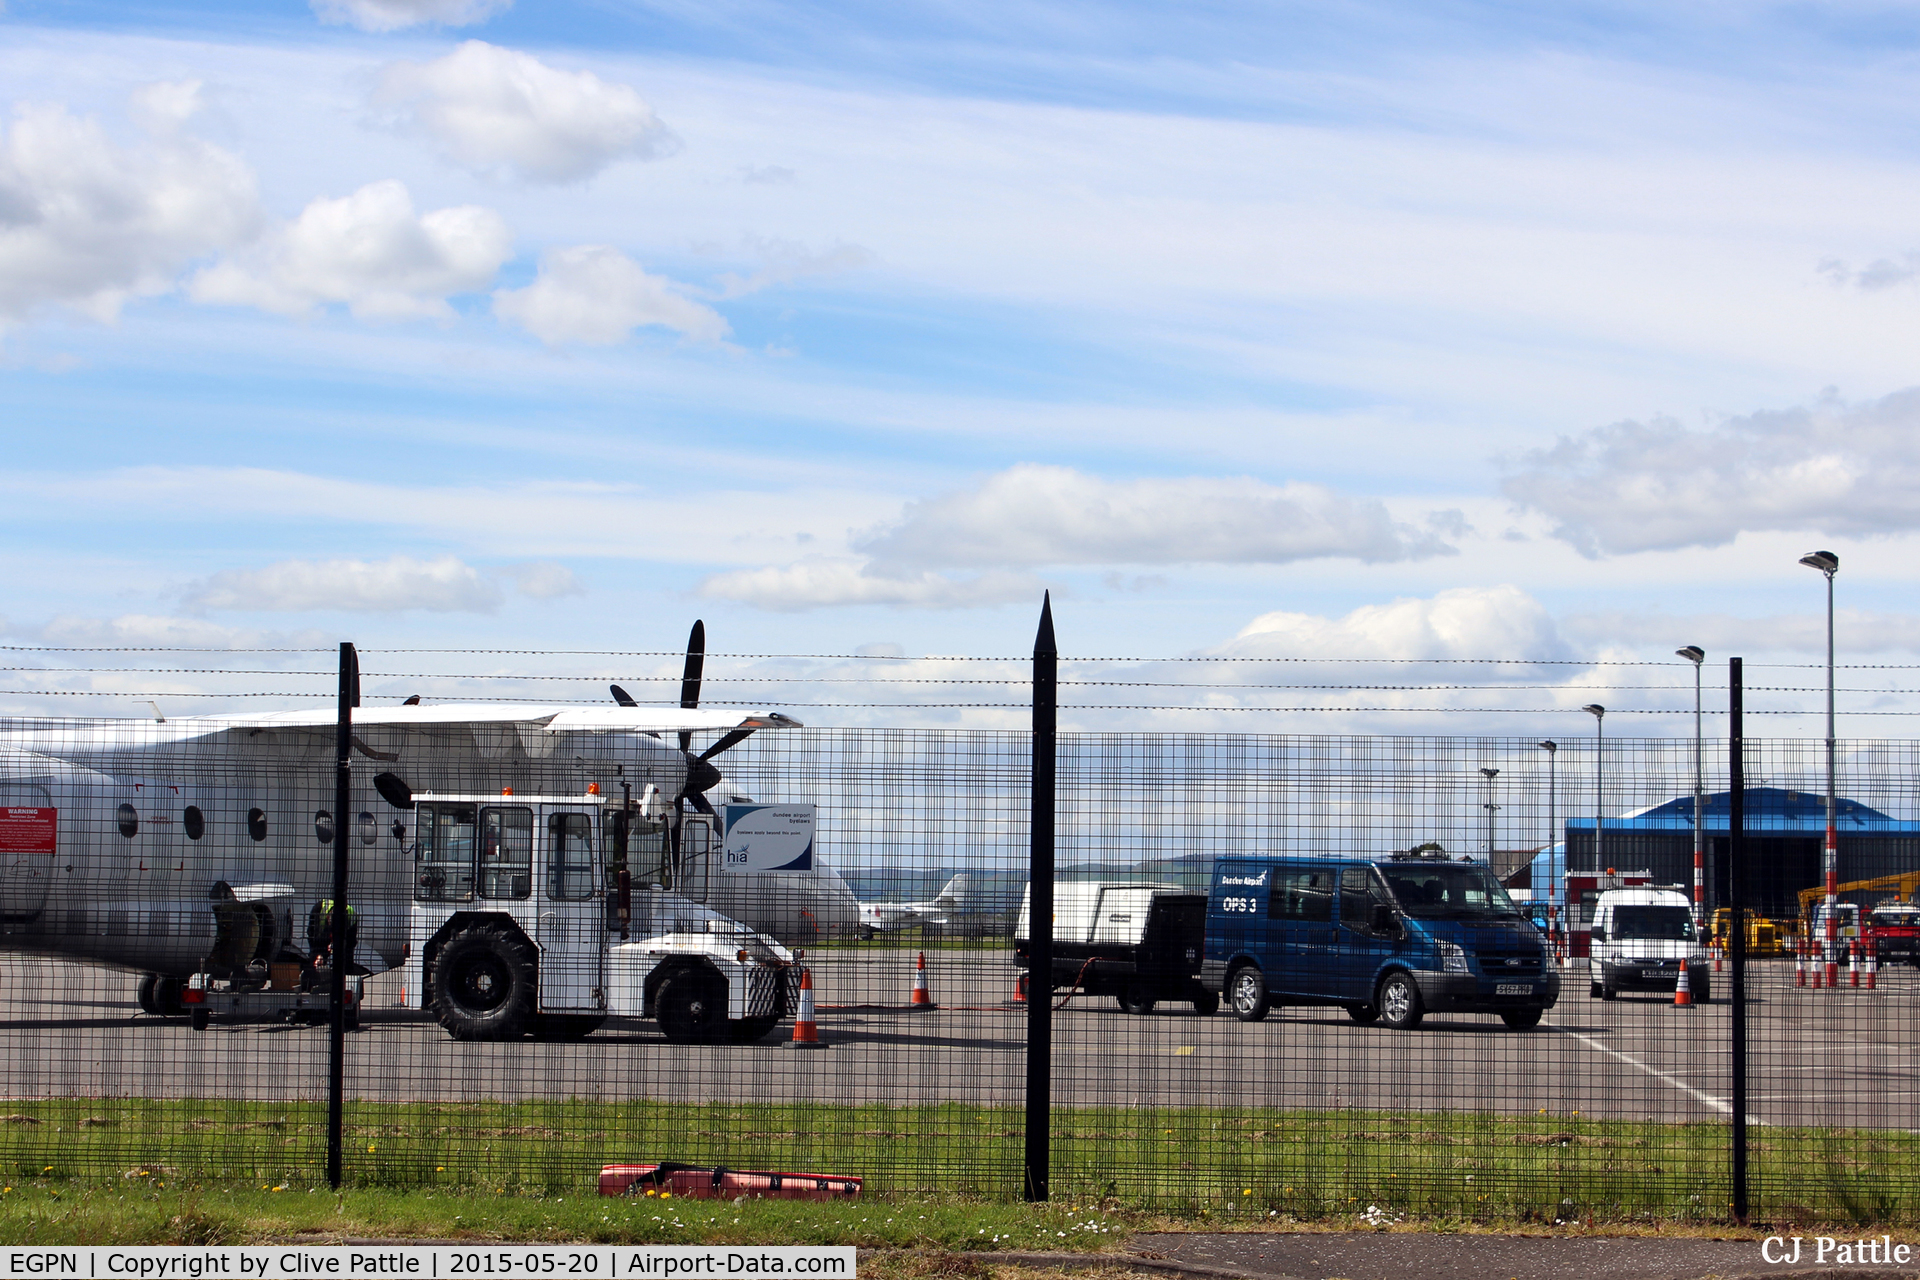 Dundee Airport, Dundee, Scotland United Kingdom (EGPN) - Through the fence at ramp operations at Dundee Riverside airport (EGPN). Aircraft is a Dornier 328 G-BZOG of Flybe/Loganair operating the scheduled Dundee to London Stansted (EGSS) service.